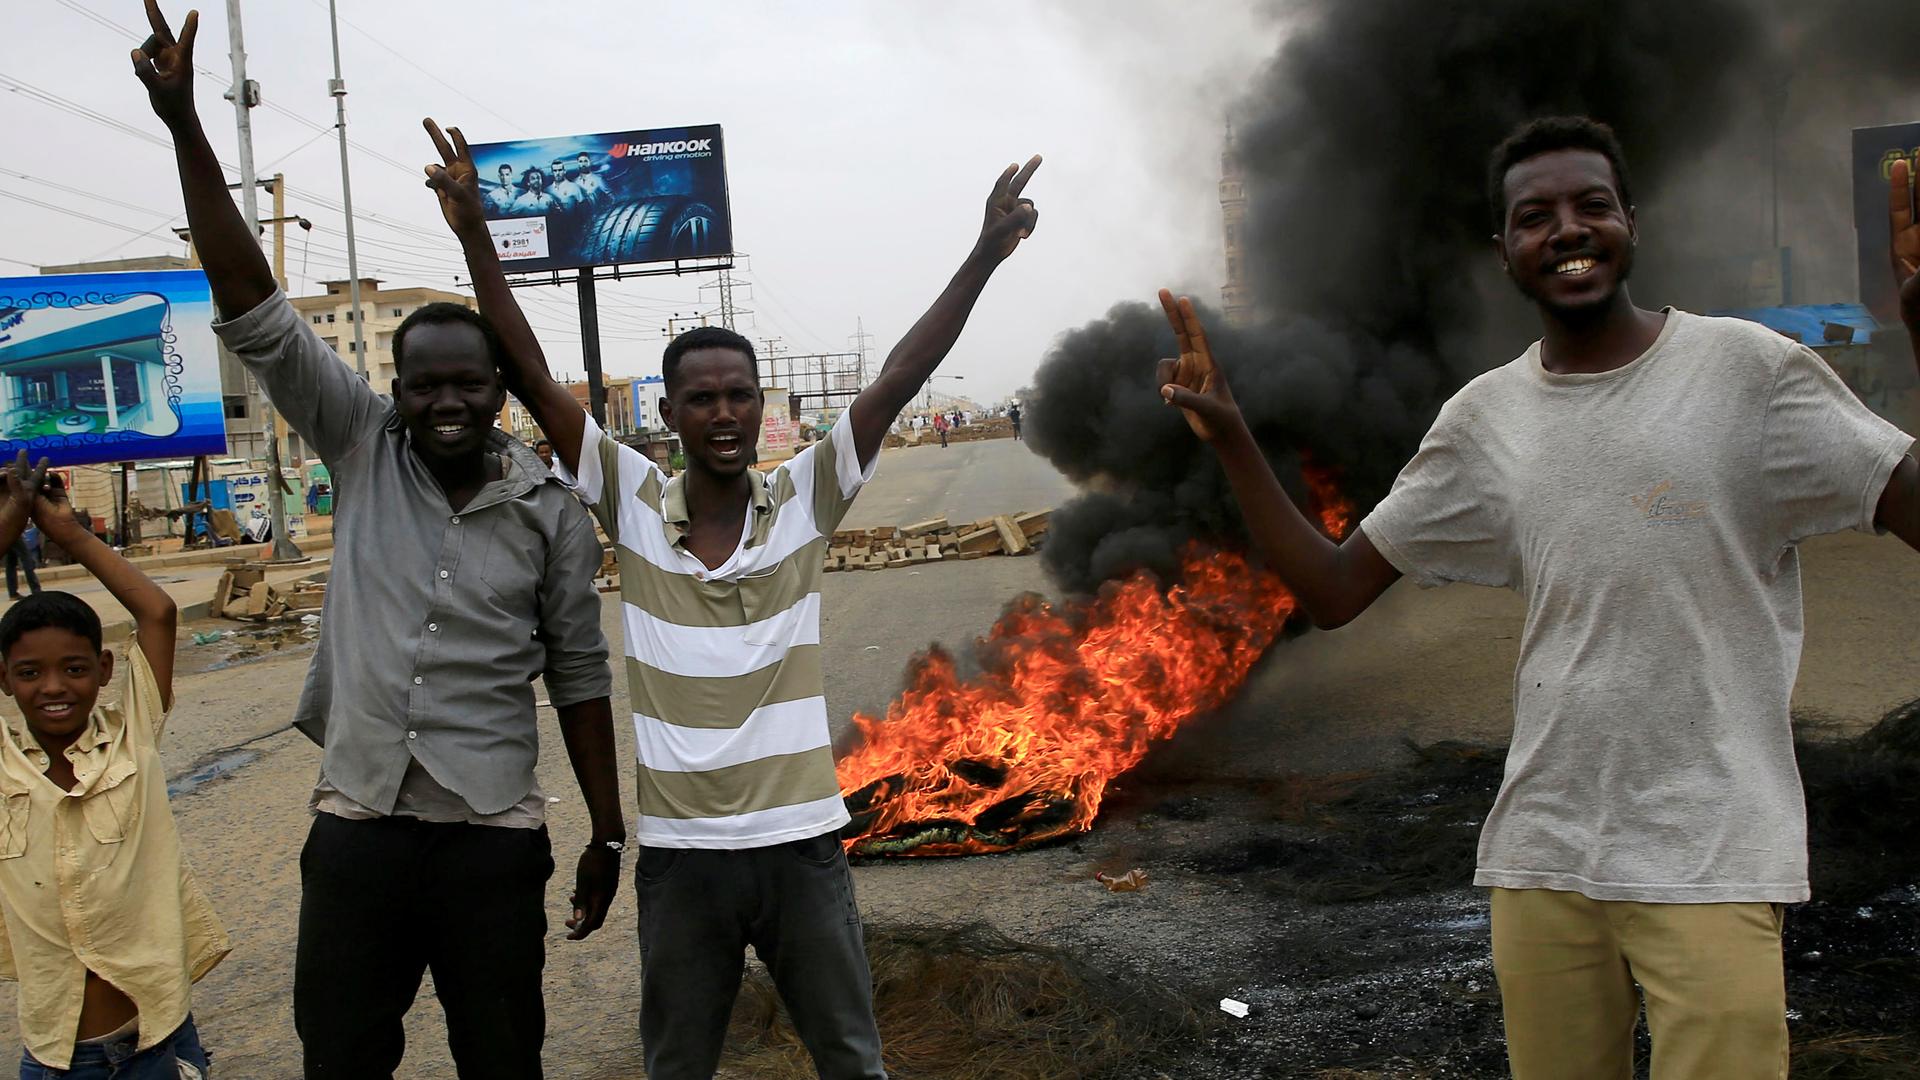 young men stand near burning tire in Sudan